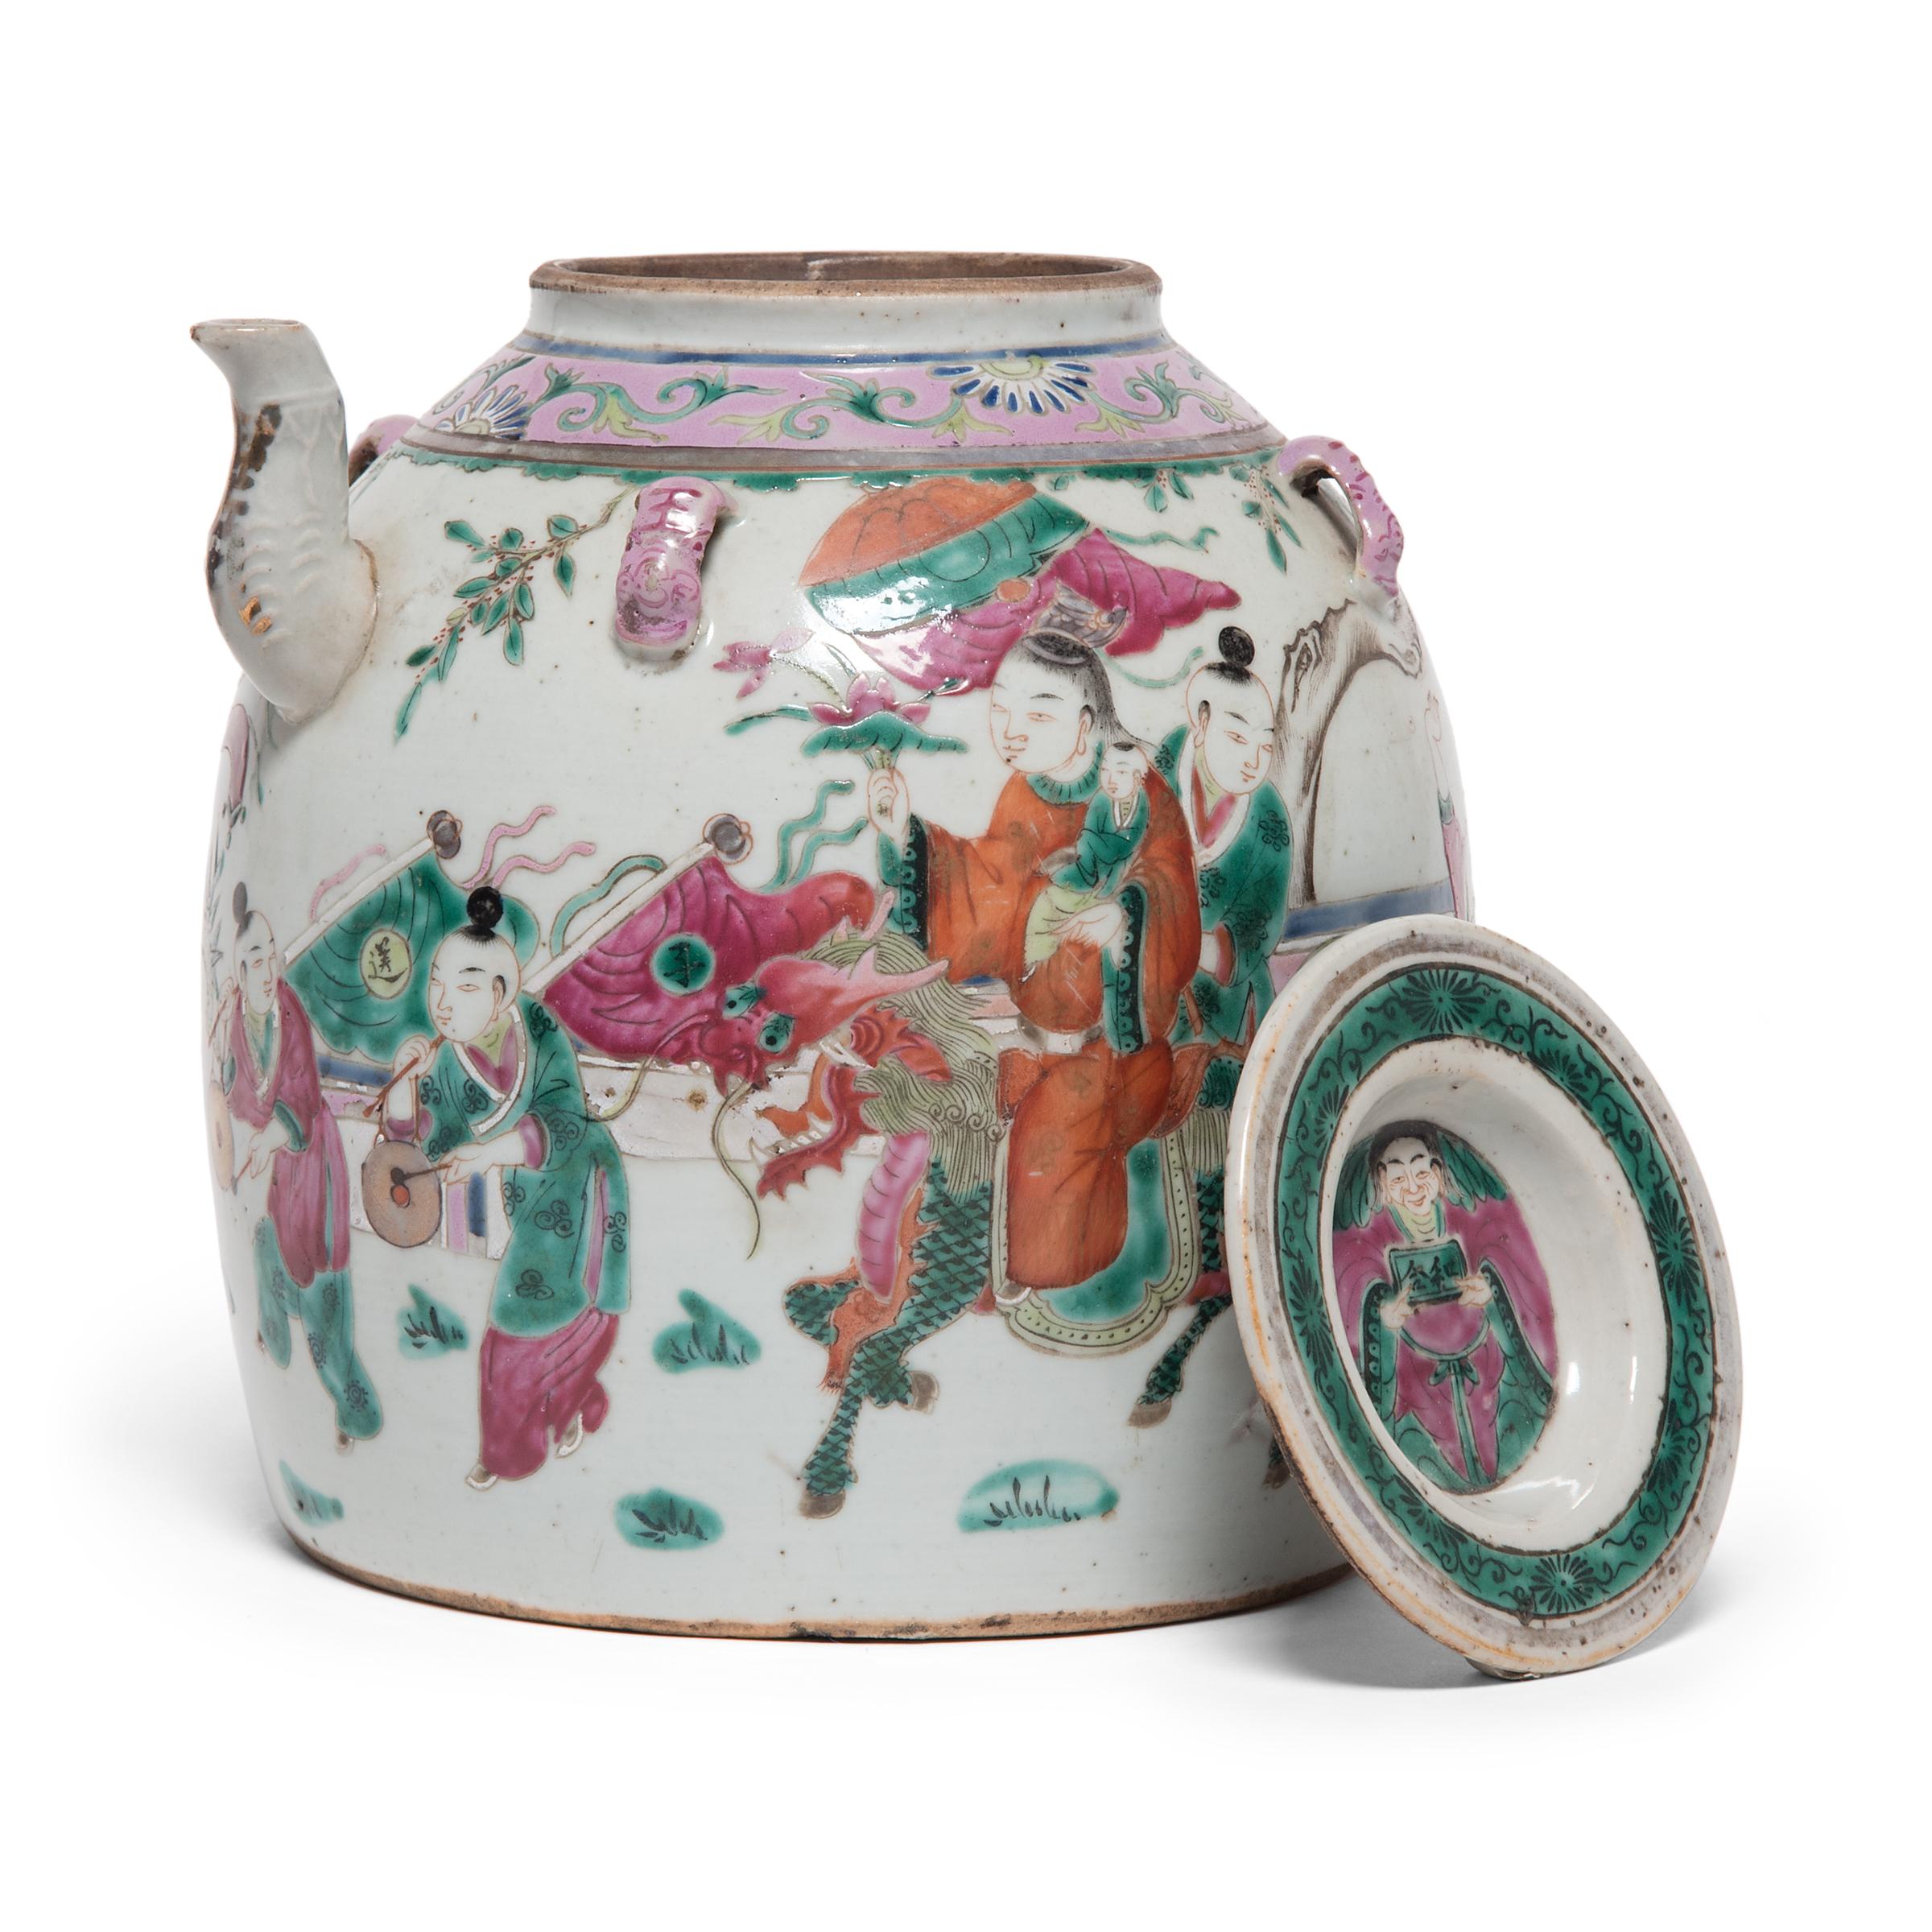 Chinese Export Chinese Enamelware Teapot with Goddess of Fertility, c. 1920